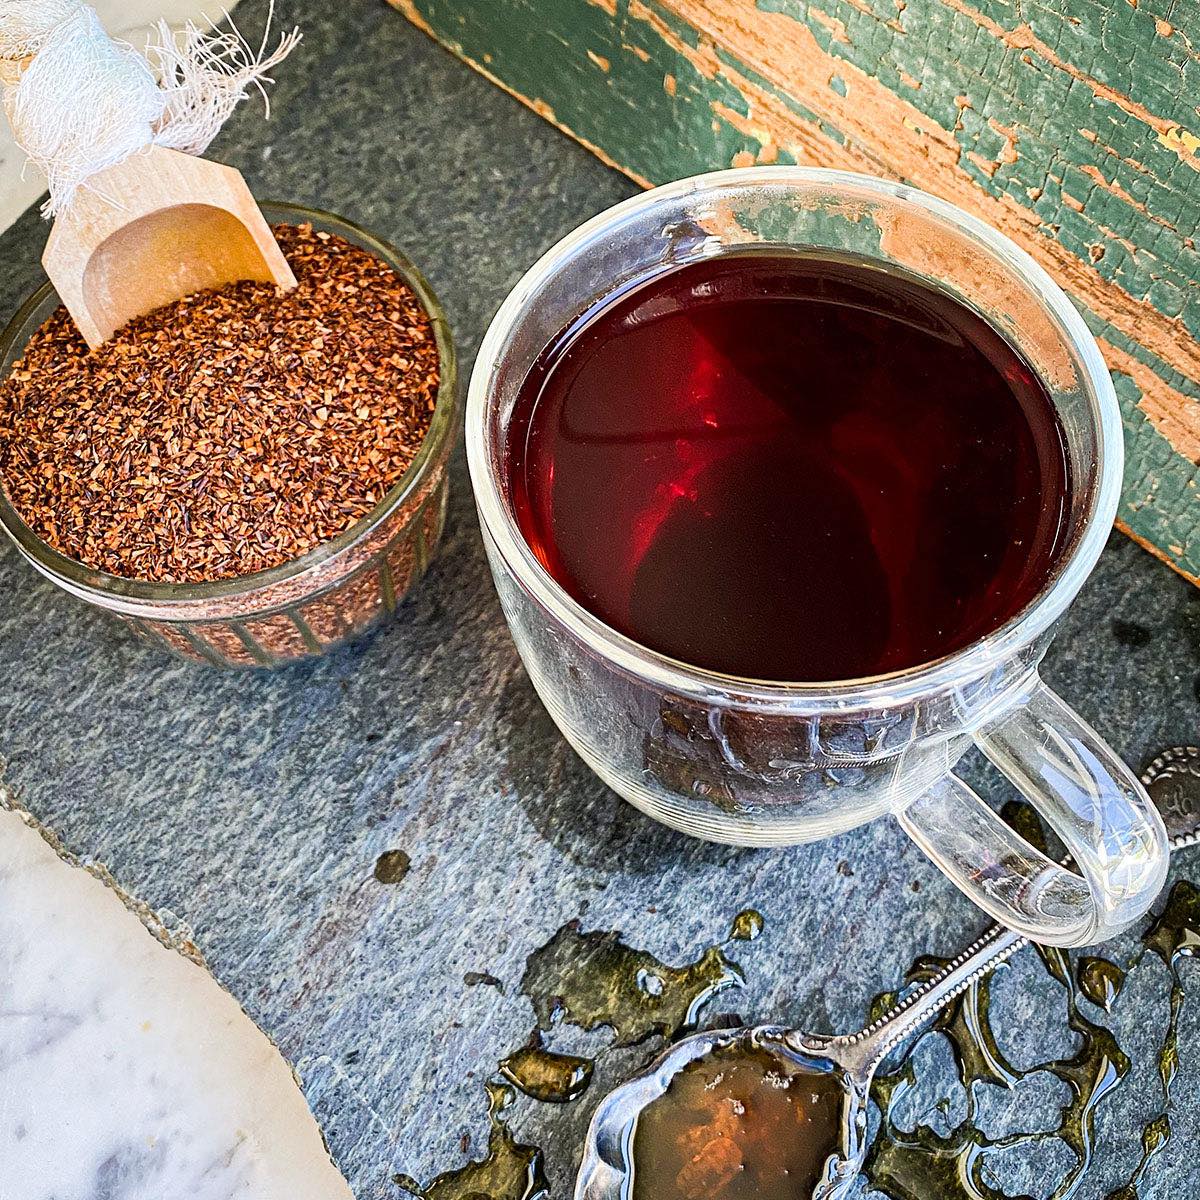 A brewed cup of red rooibos is flanked by a spoon dripping with honey and a jar filled with the dried tea and a scoop.